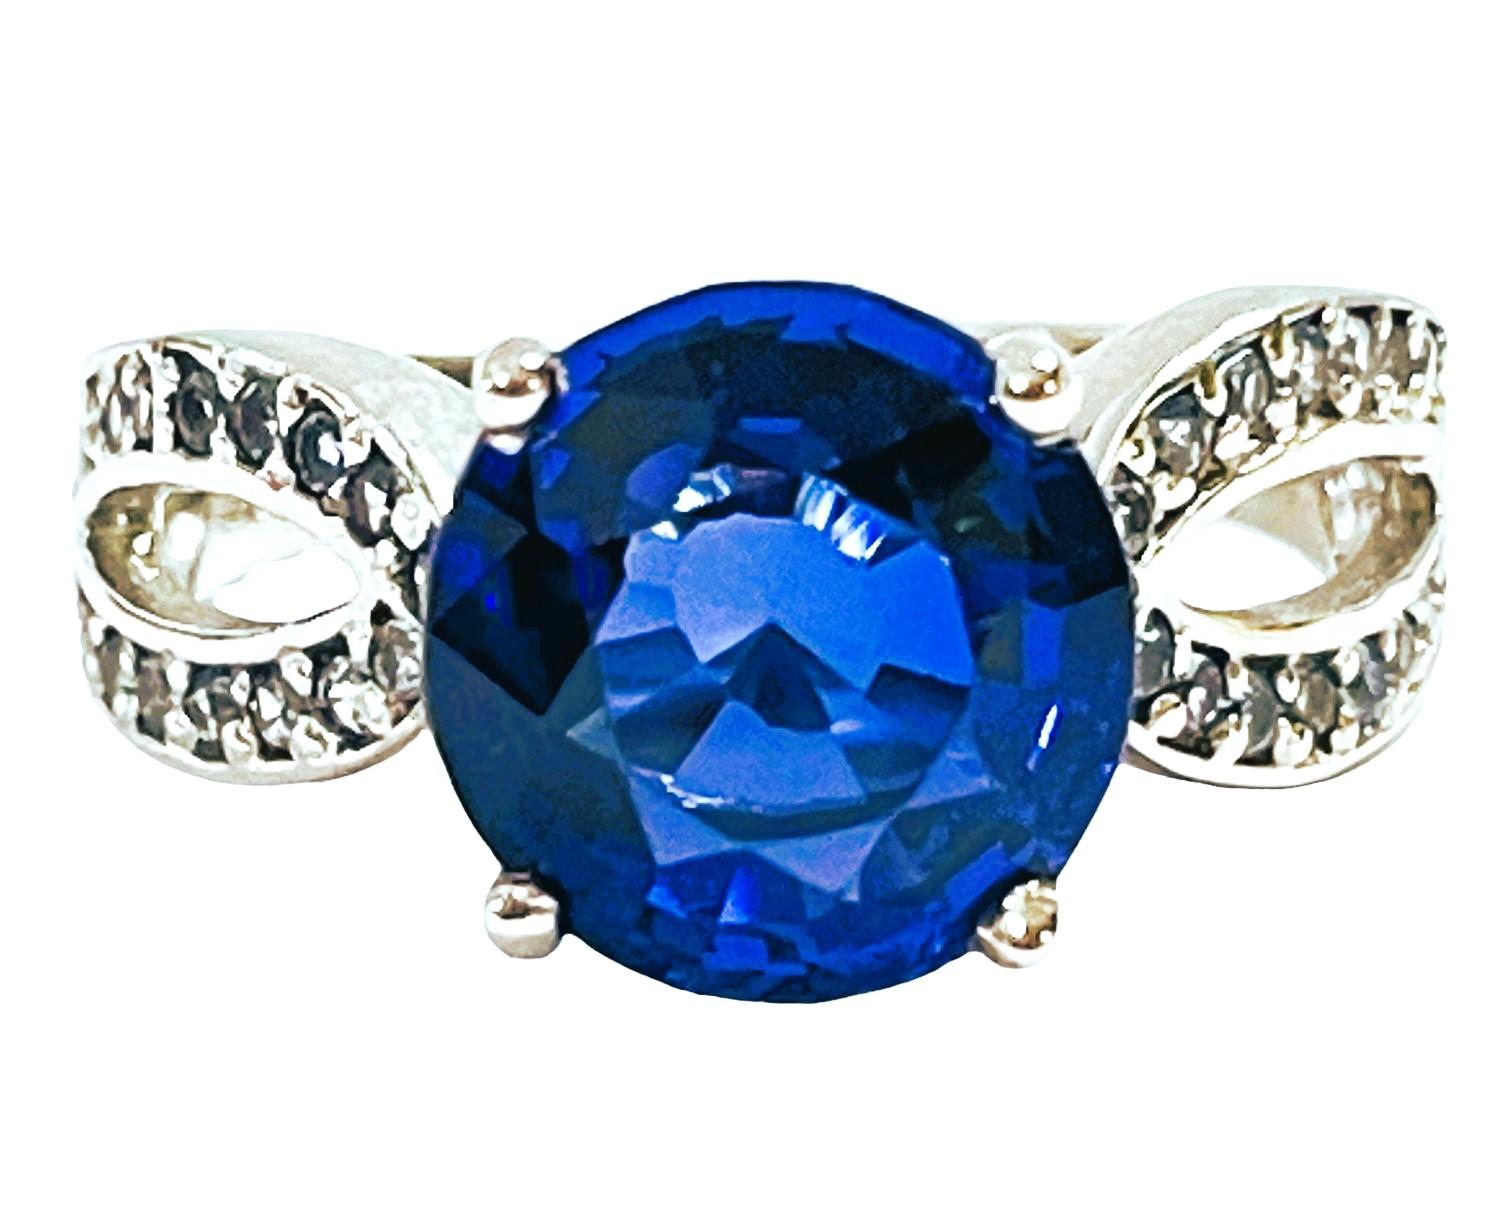 The ring is a size 7.25 and has just a beautiful setting..  It was mined in Africa.  It is an authentic natural stone.  It is a very high quality stone. The stone is a round cut stone and is 5.2 cts.  It is flanked by diamond cut Lighter Blue